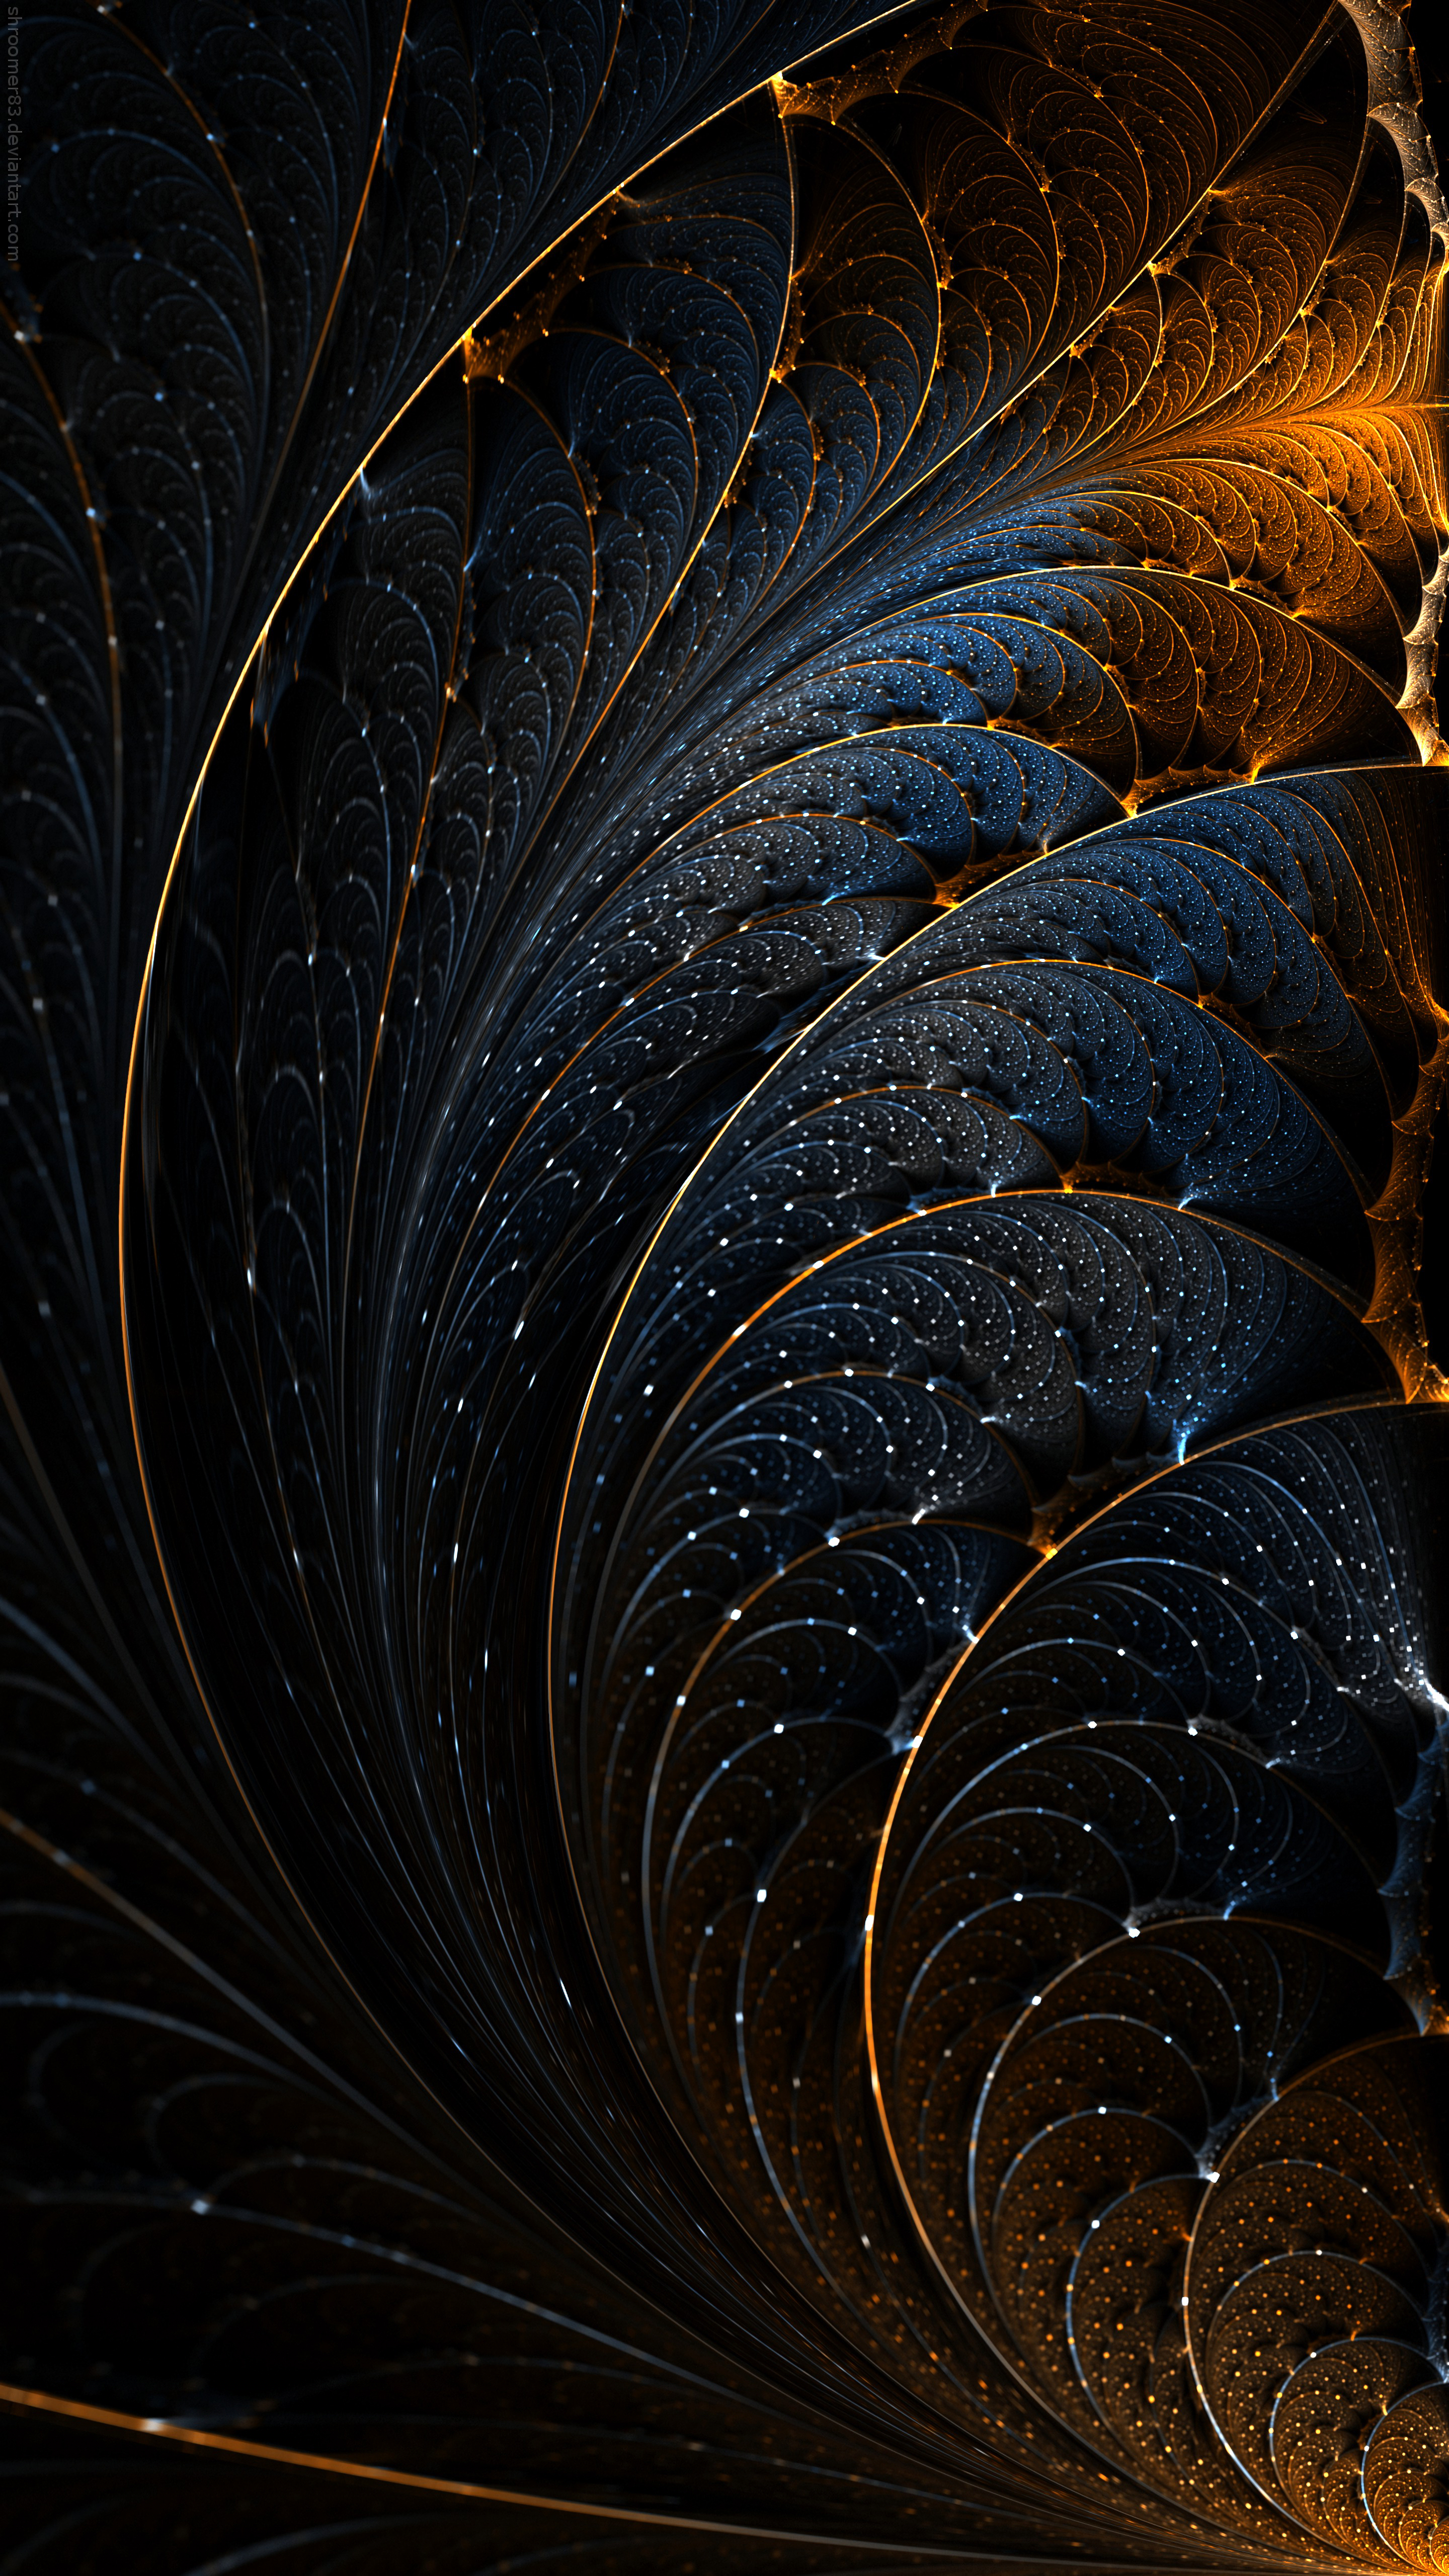 1080p Abstract Hd Images